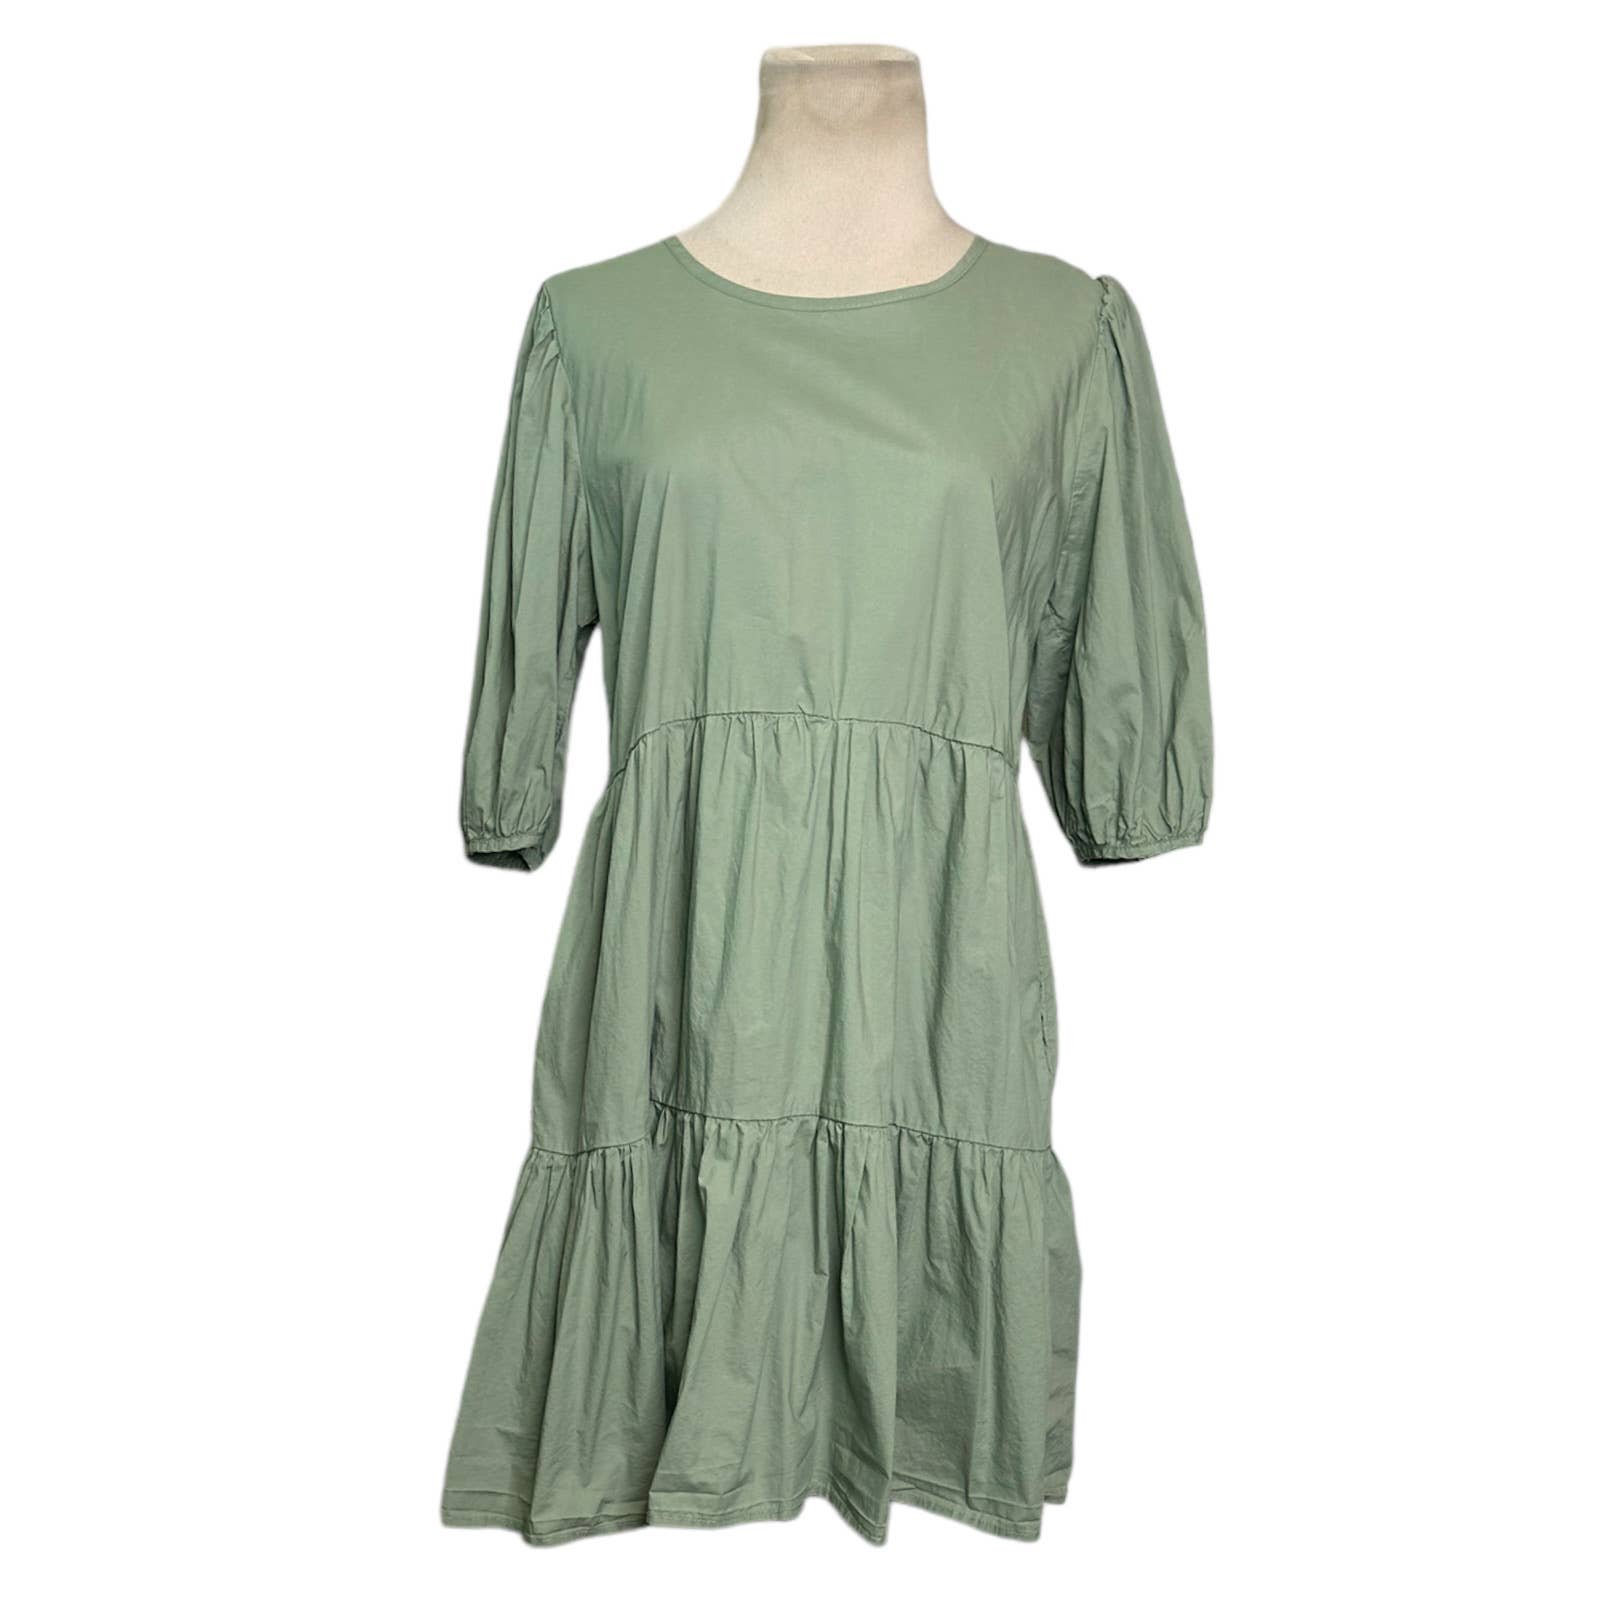 Exclusive know.one.cares green short puff sleeves tiered mini dress size Medium g4pOARiMa hot sale